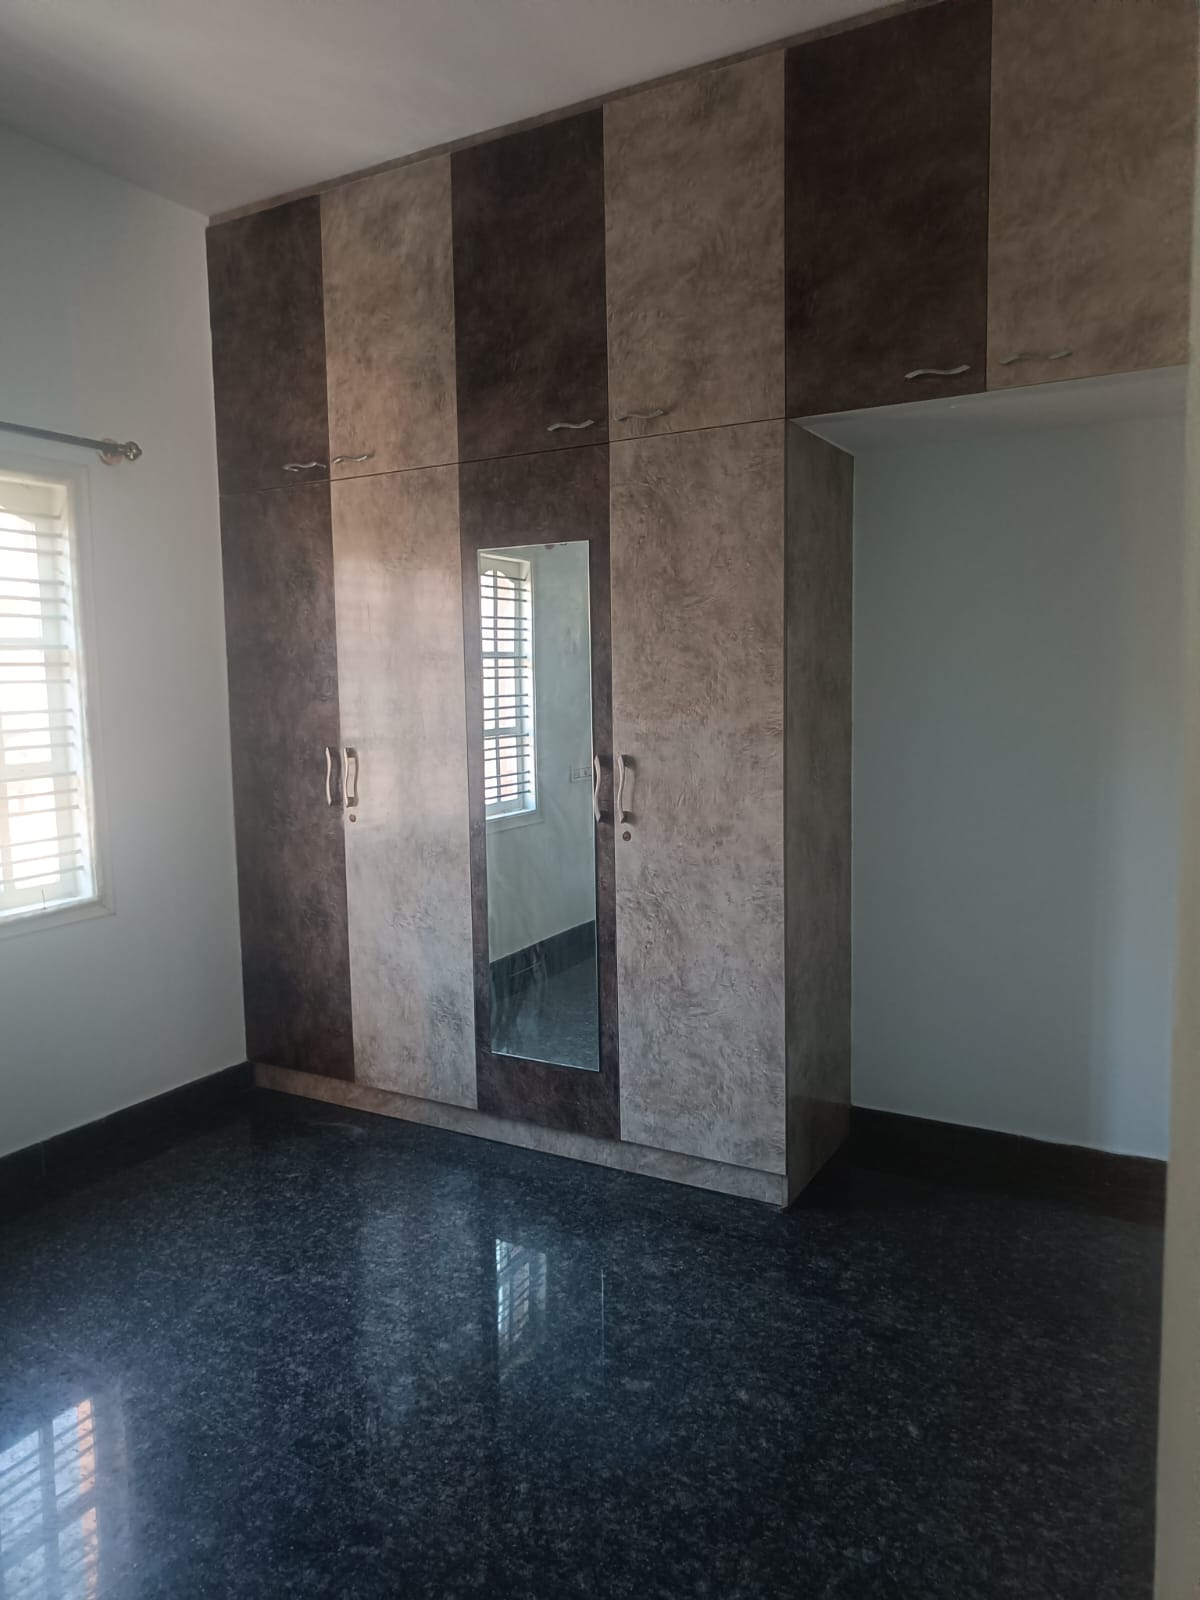 1 BHK Independent House for Lease Only at JAML2 - 2360 in Kempapura Agrahara